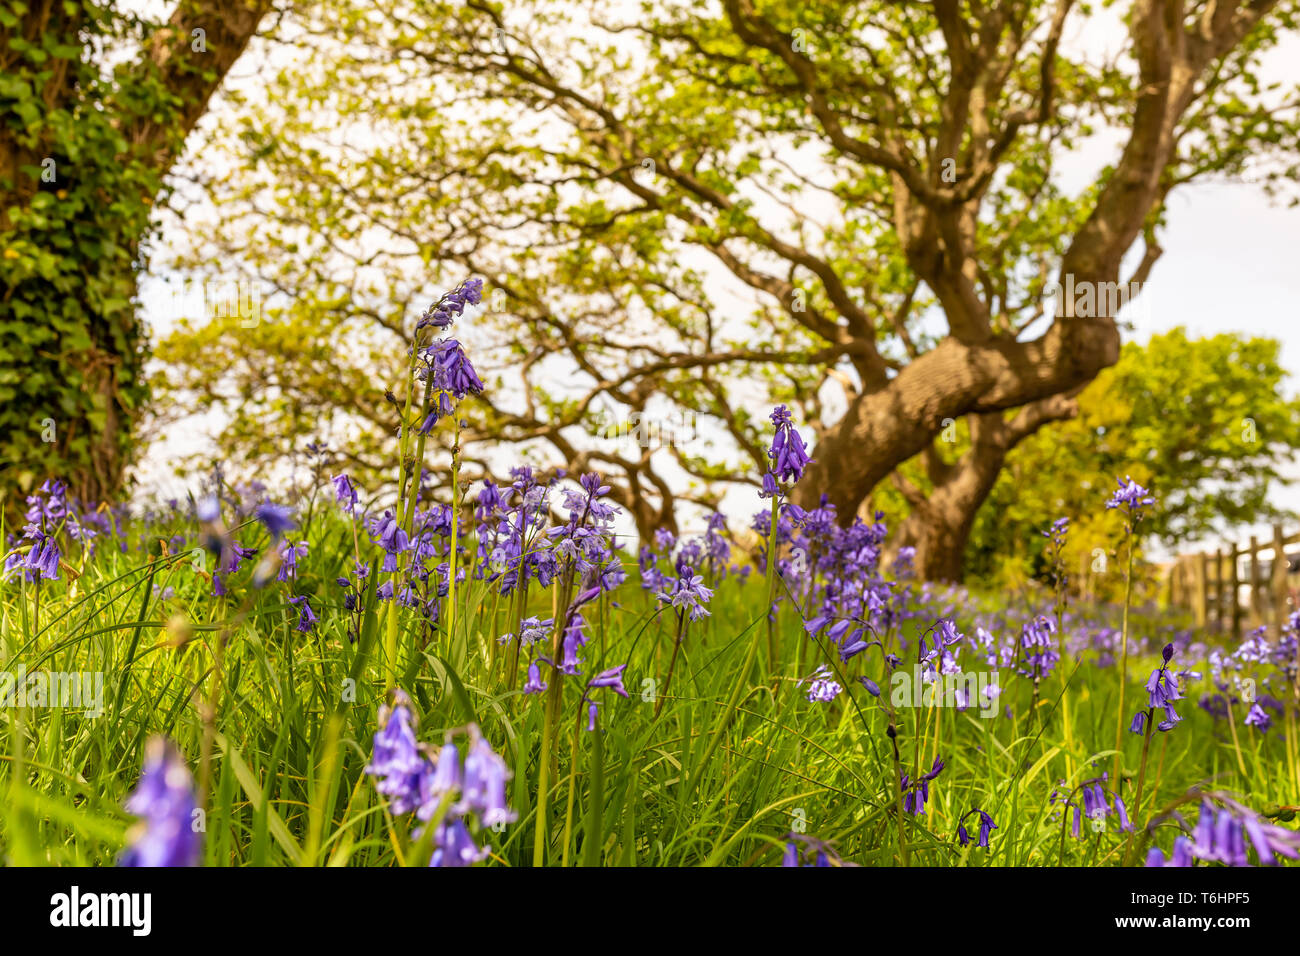 Creative colour landscape photograph with in-focus spanish bluebells in foreground and windswept trees in background, Taken in Poole, Dorset, England. Stock Photo